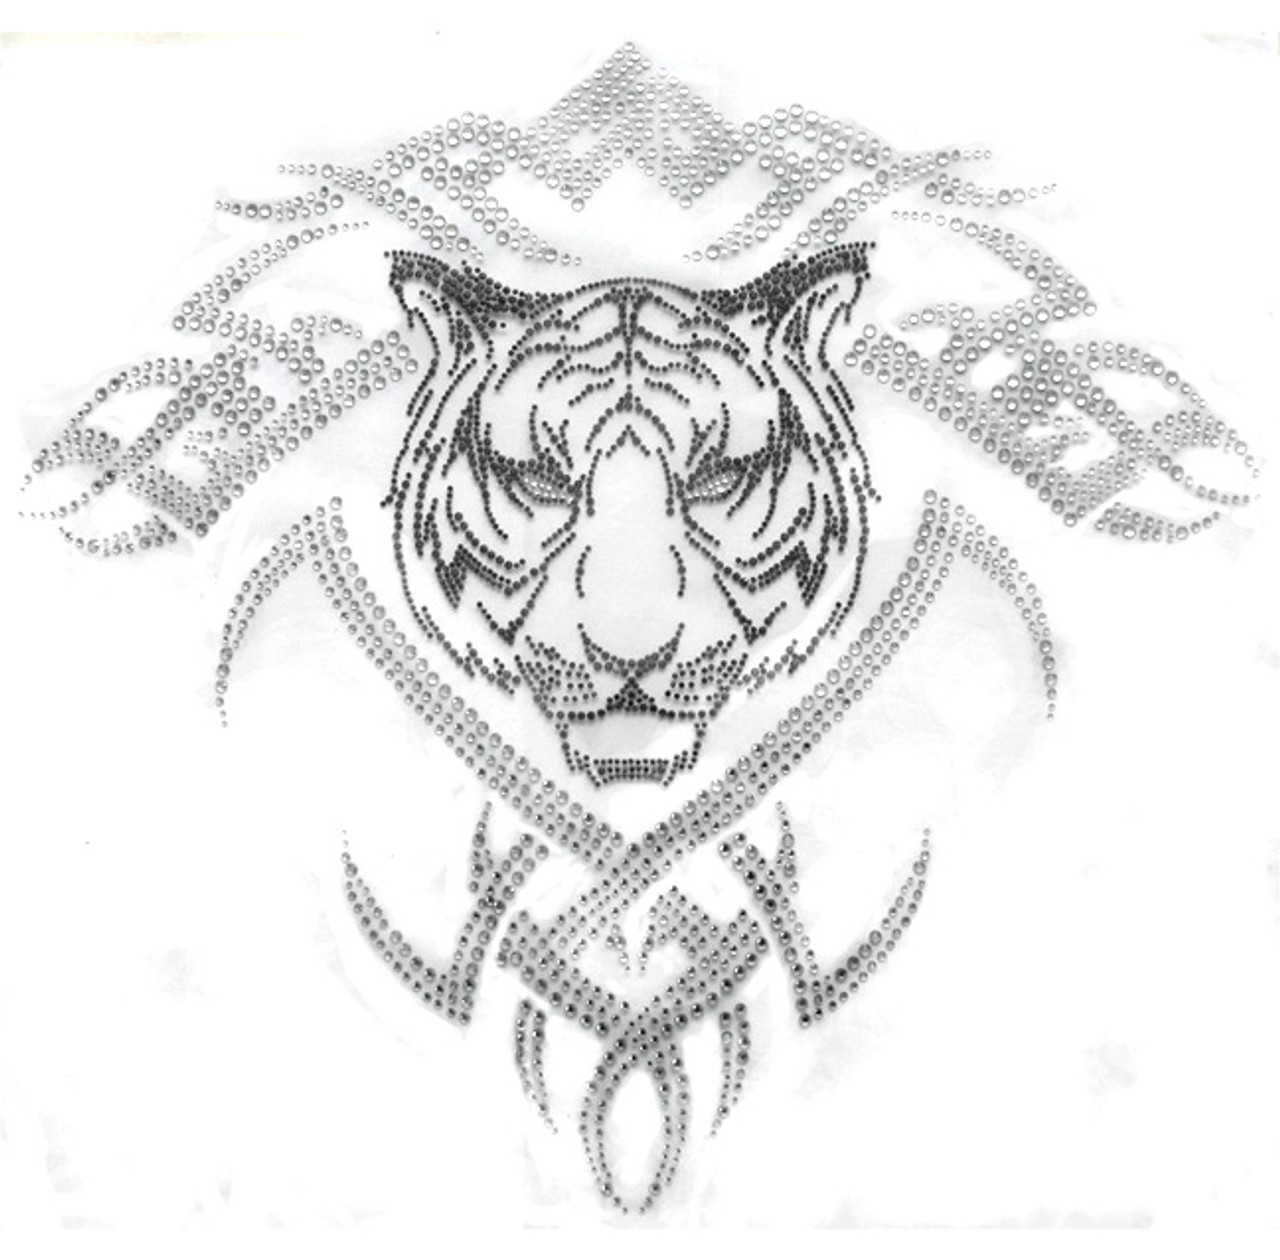 DAREDEVEIL ANGRY TIGER for Men Women Waterproof Hand Temporary Body Tattoo  - Price in India, Buy DAREDEVEIL ANGRY TIGER for Men Women Waterproof Hand  Temporary Body Tattoo Online In India, Reviews, Ratings